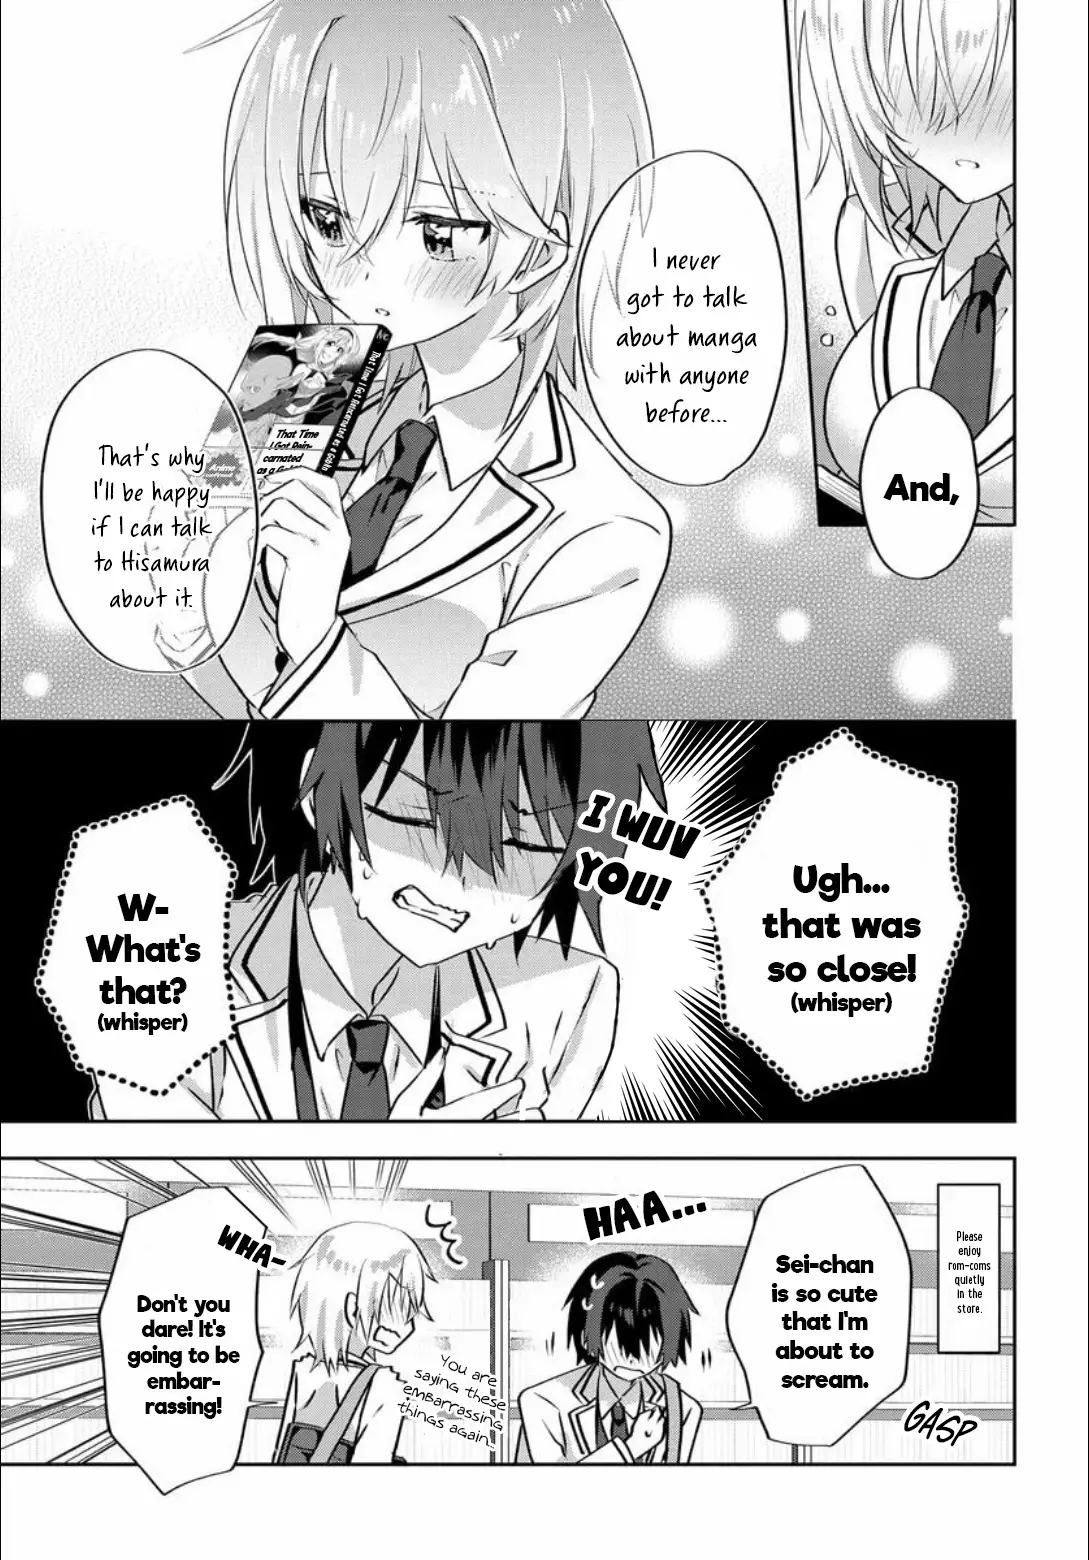 Since I’Ve Entered The World Of Romantic Comedy Manga, I’Ll Do My Best To Make The Losing Heroine Happy - 5.1 page 5-57b05e2a